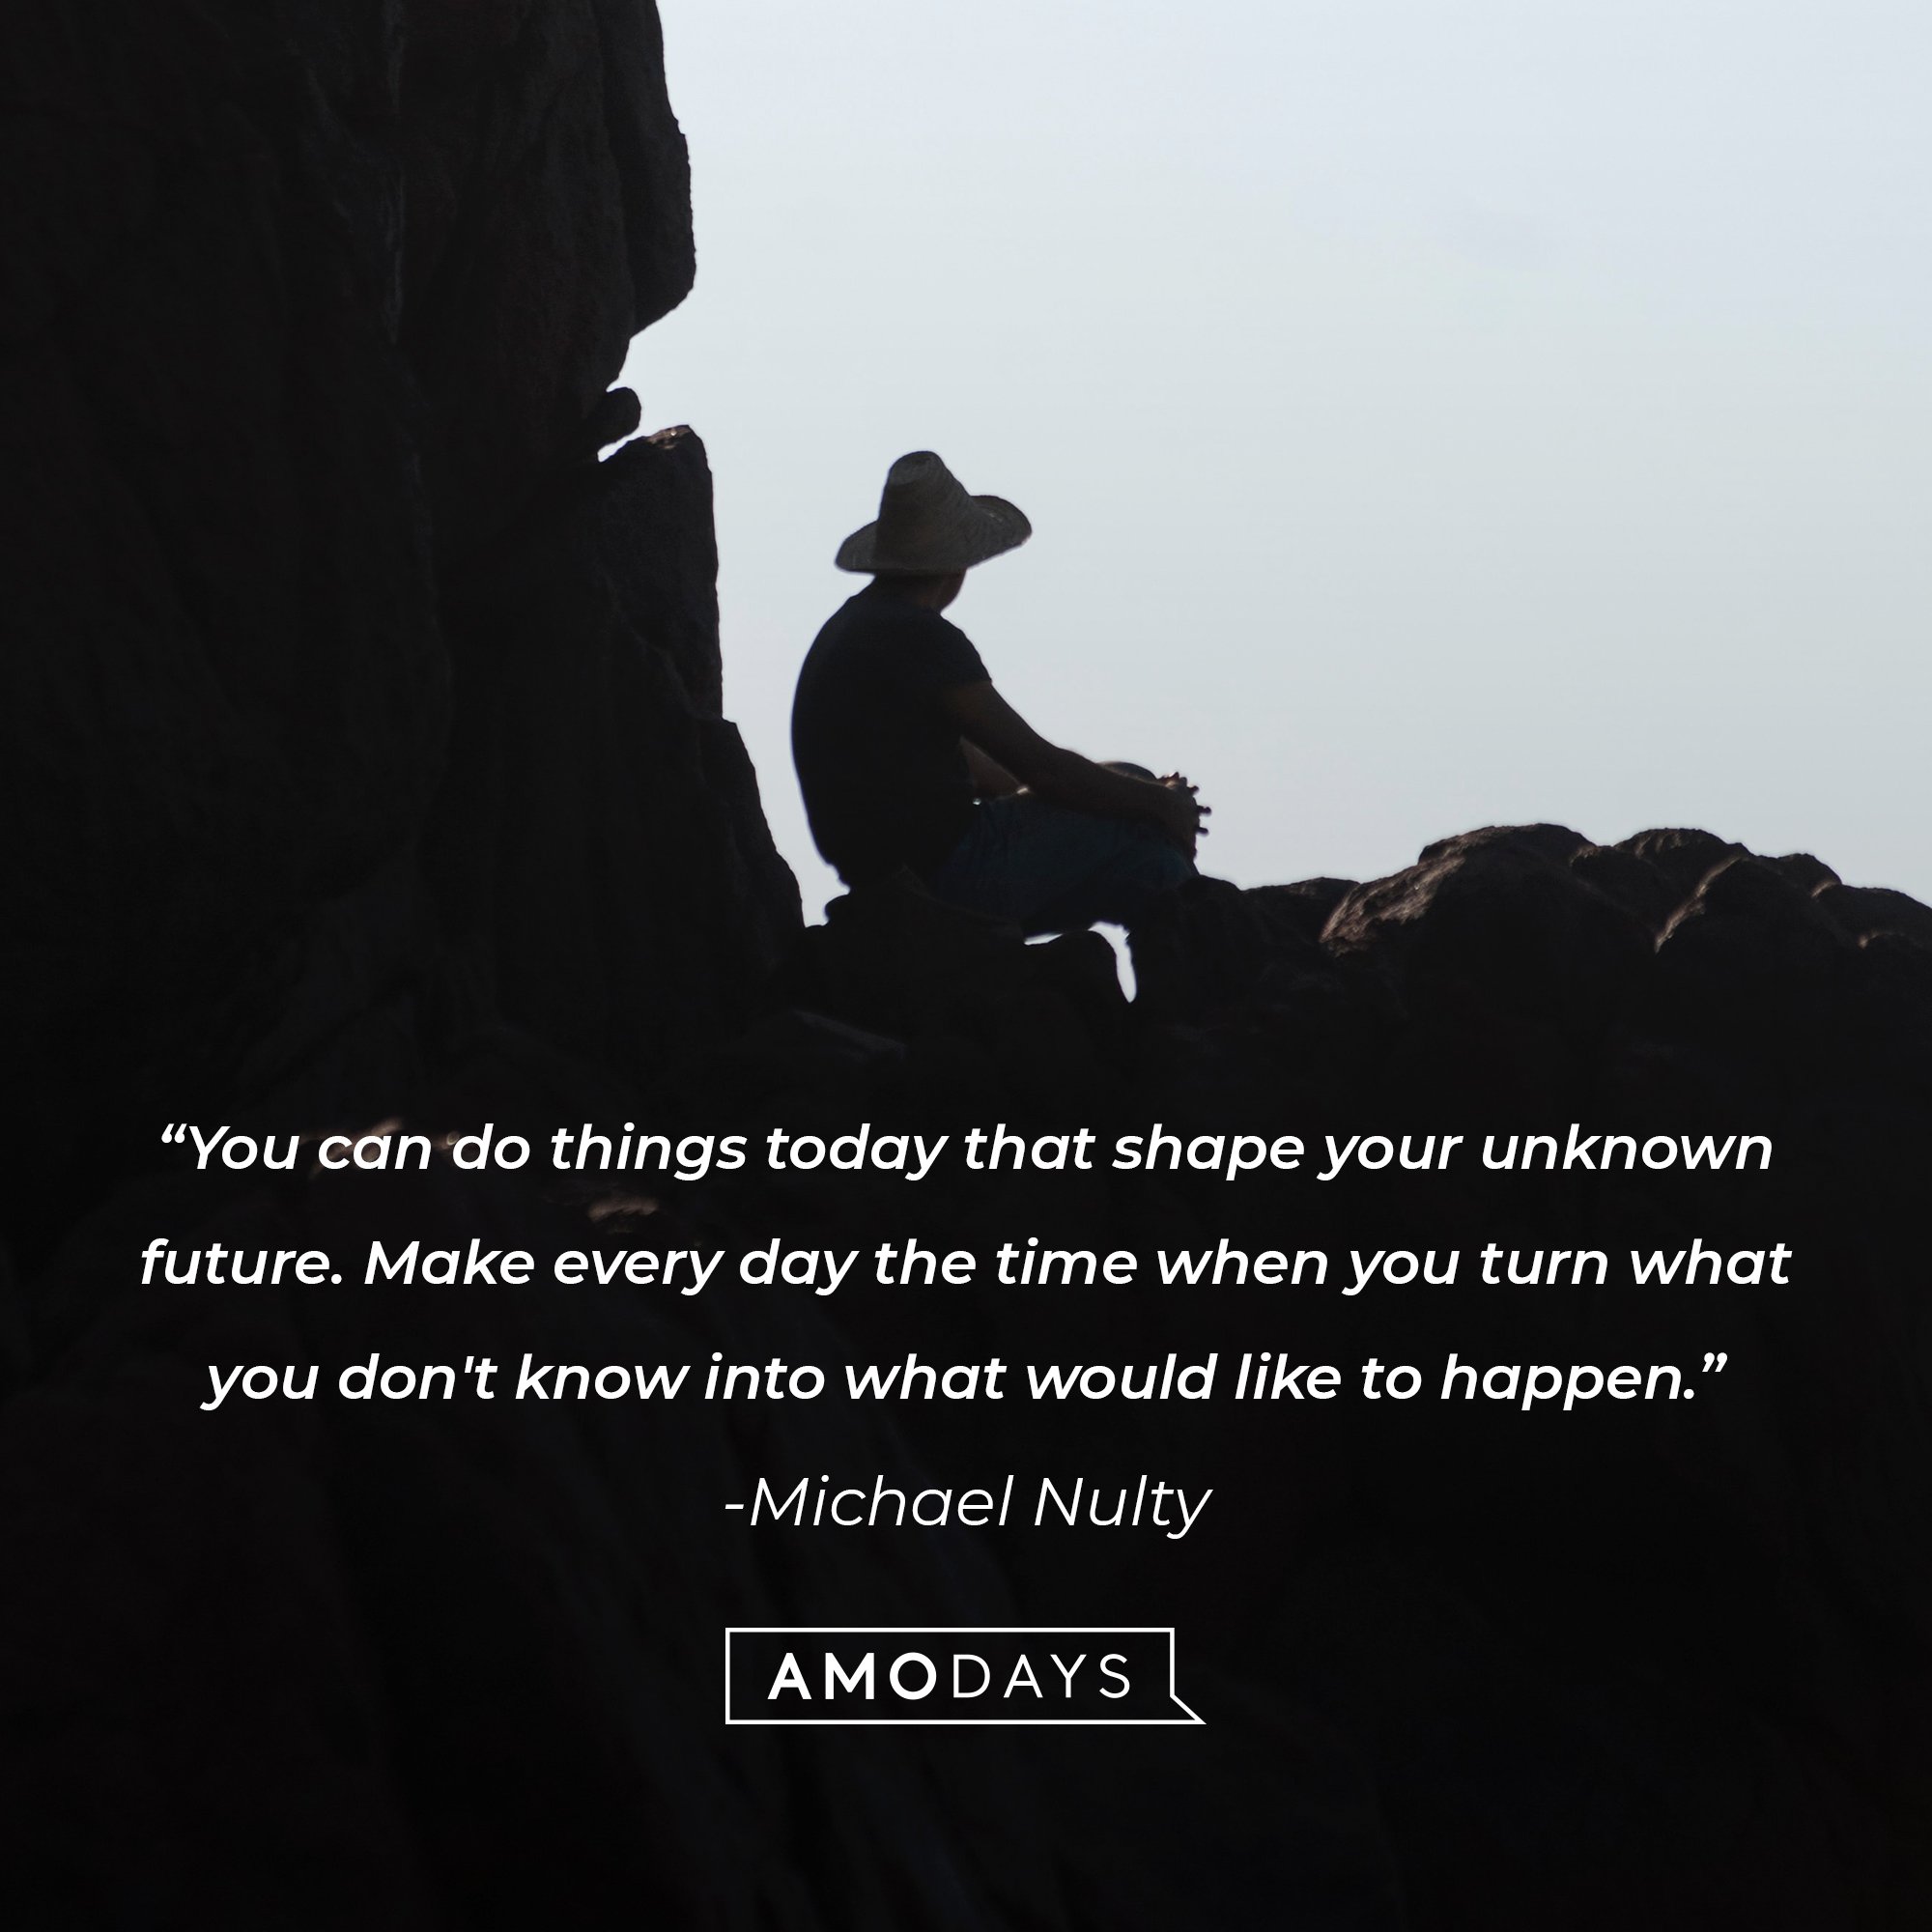 Michael Nulty's quote: “You can do things today that shape your unknown future. Make every day the time when you turn what you don't know into what would like to happen.” | Image: AmoDays